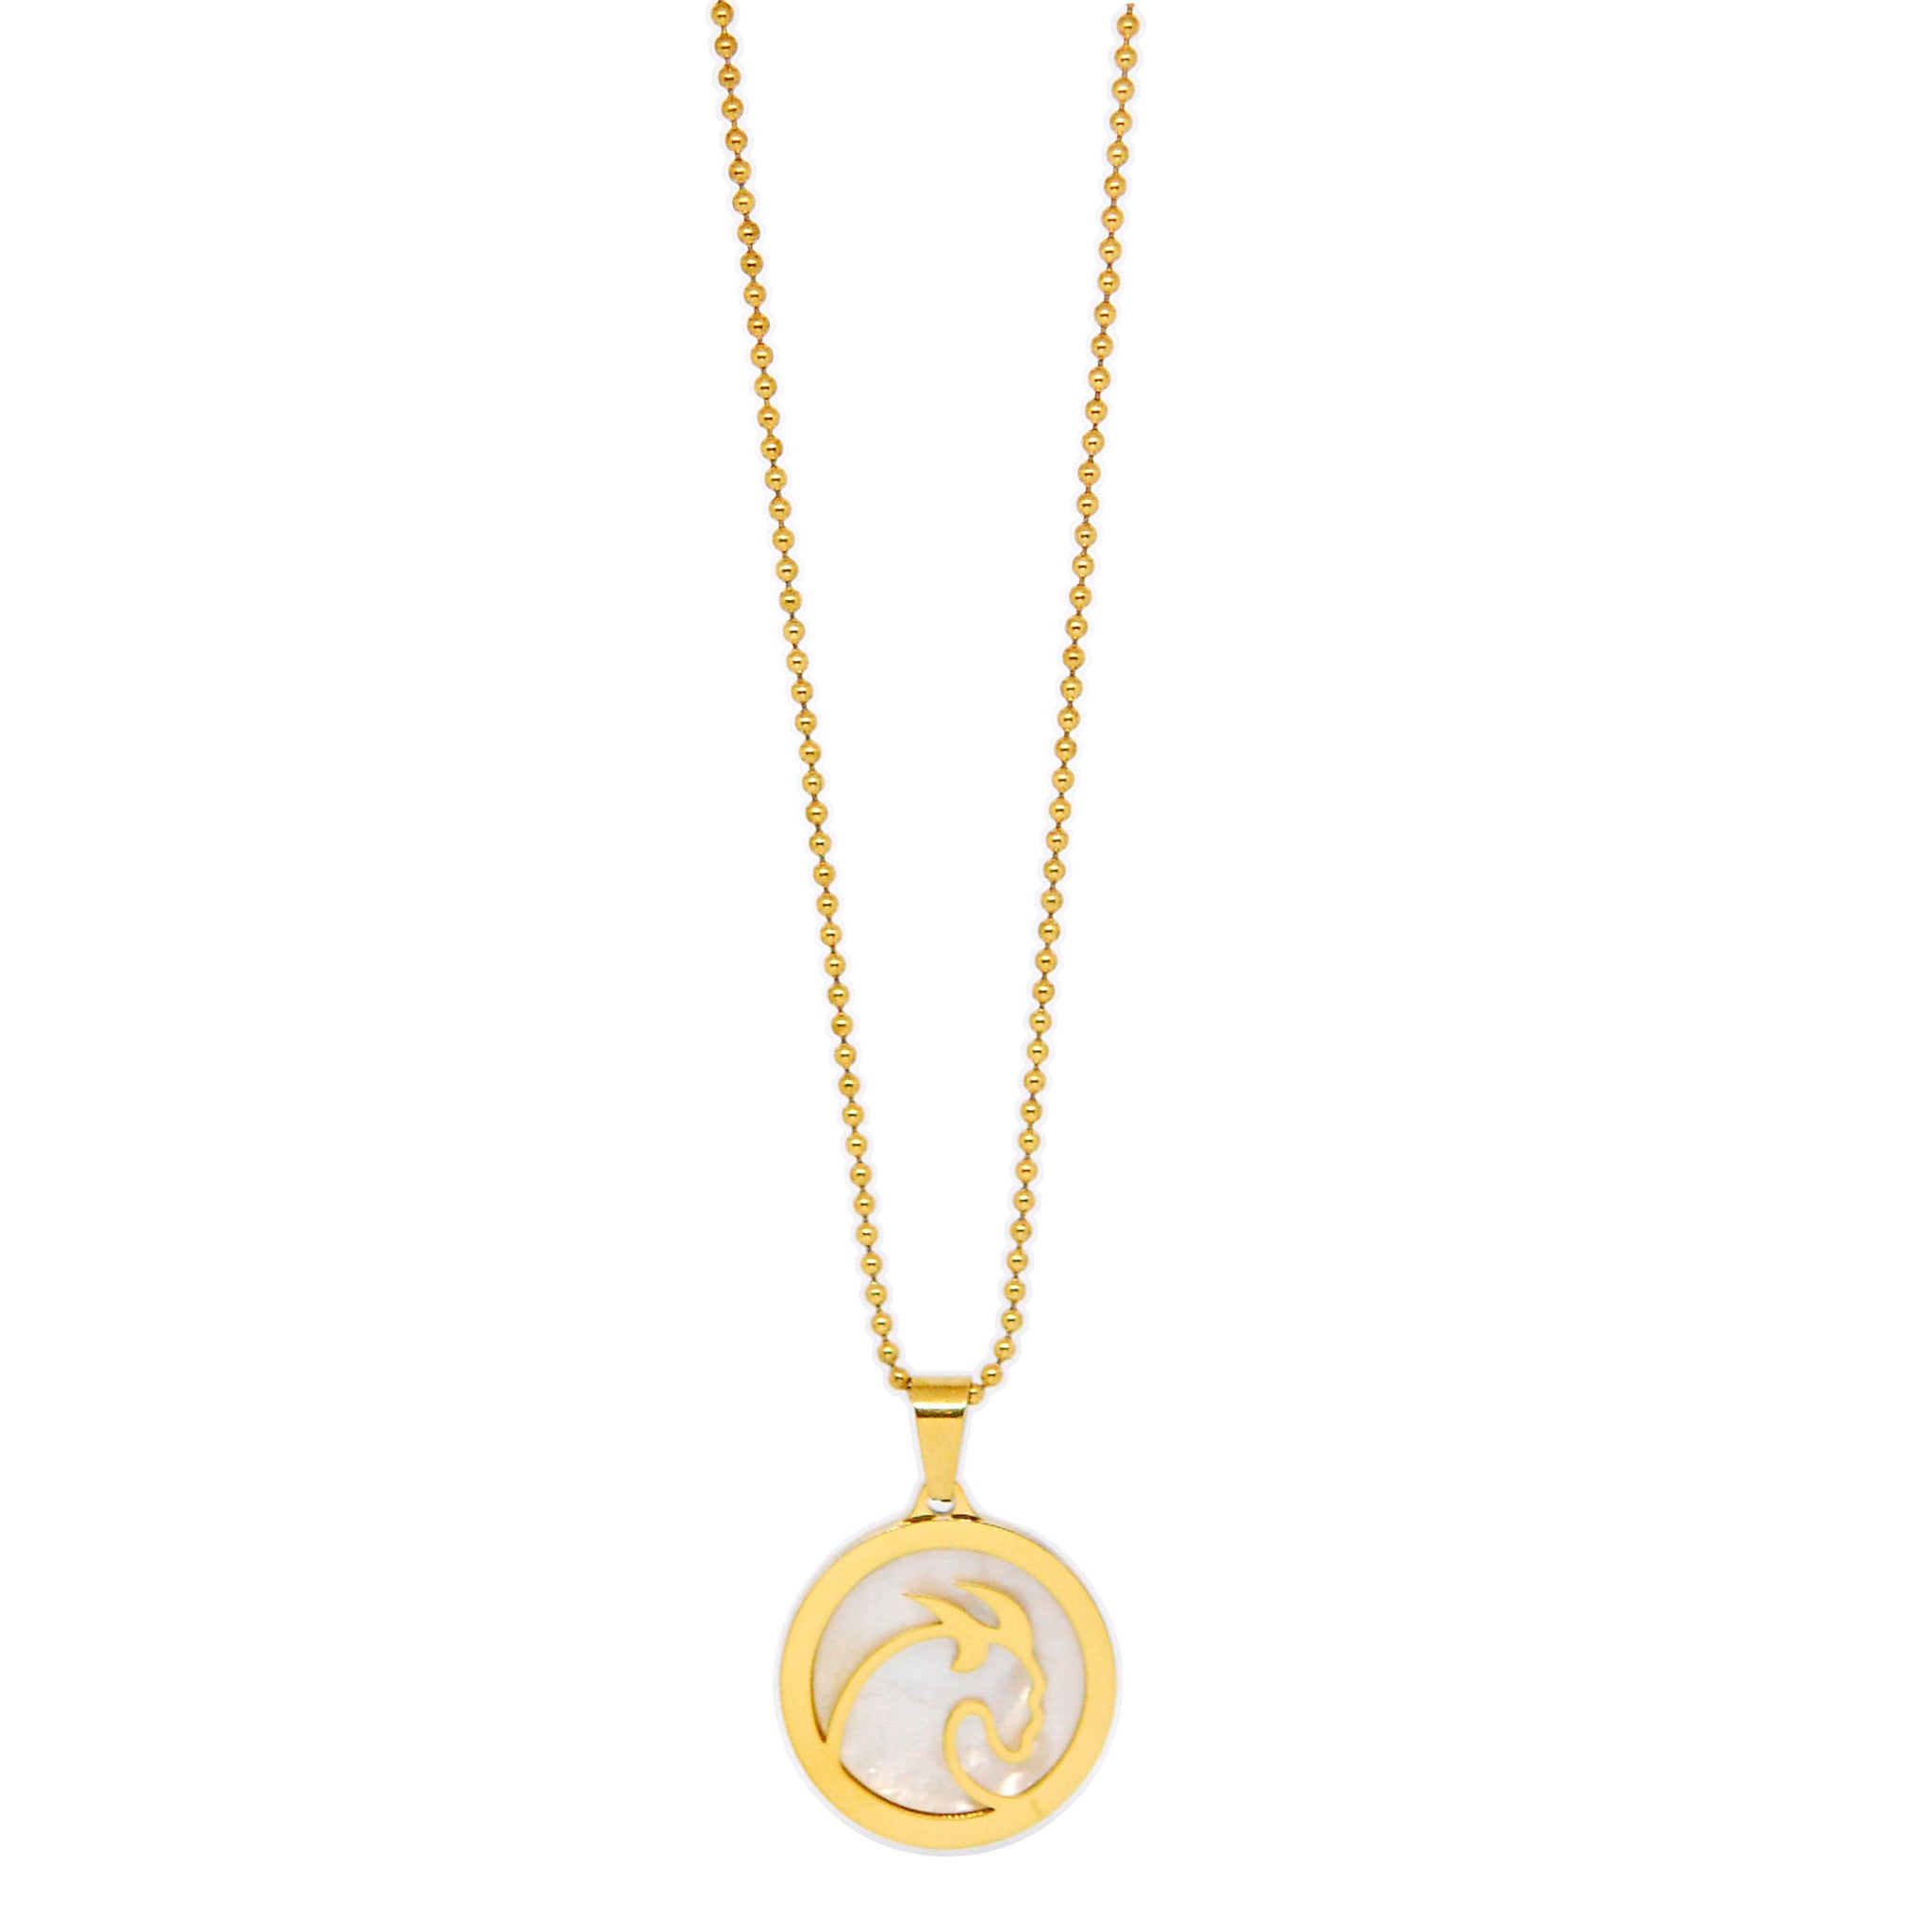 ESN 7968: All IPG Mop Capricorn Zodiac Necklace w/ 18" IPG Ball Chain